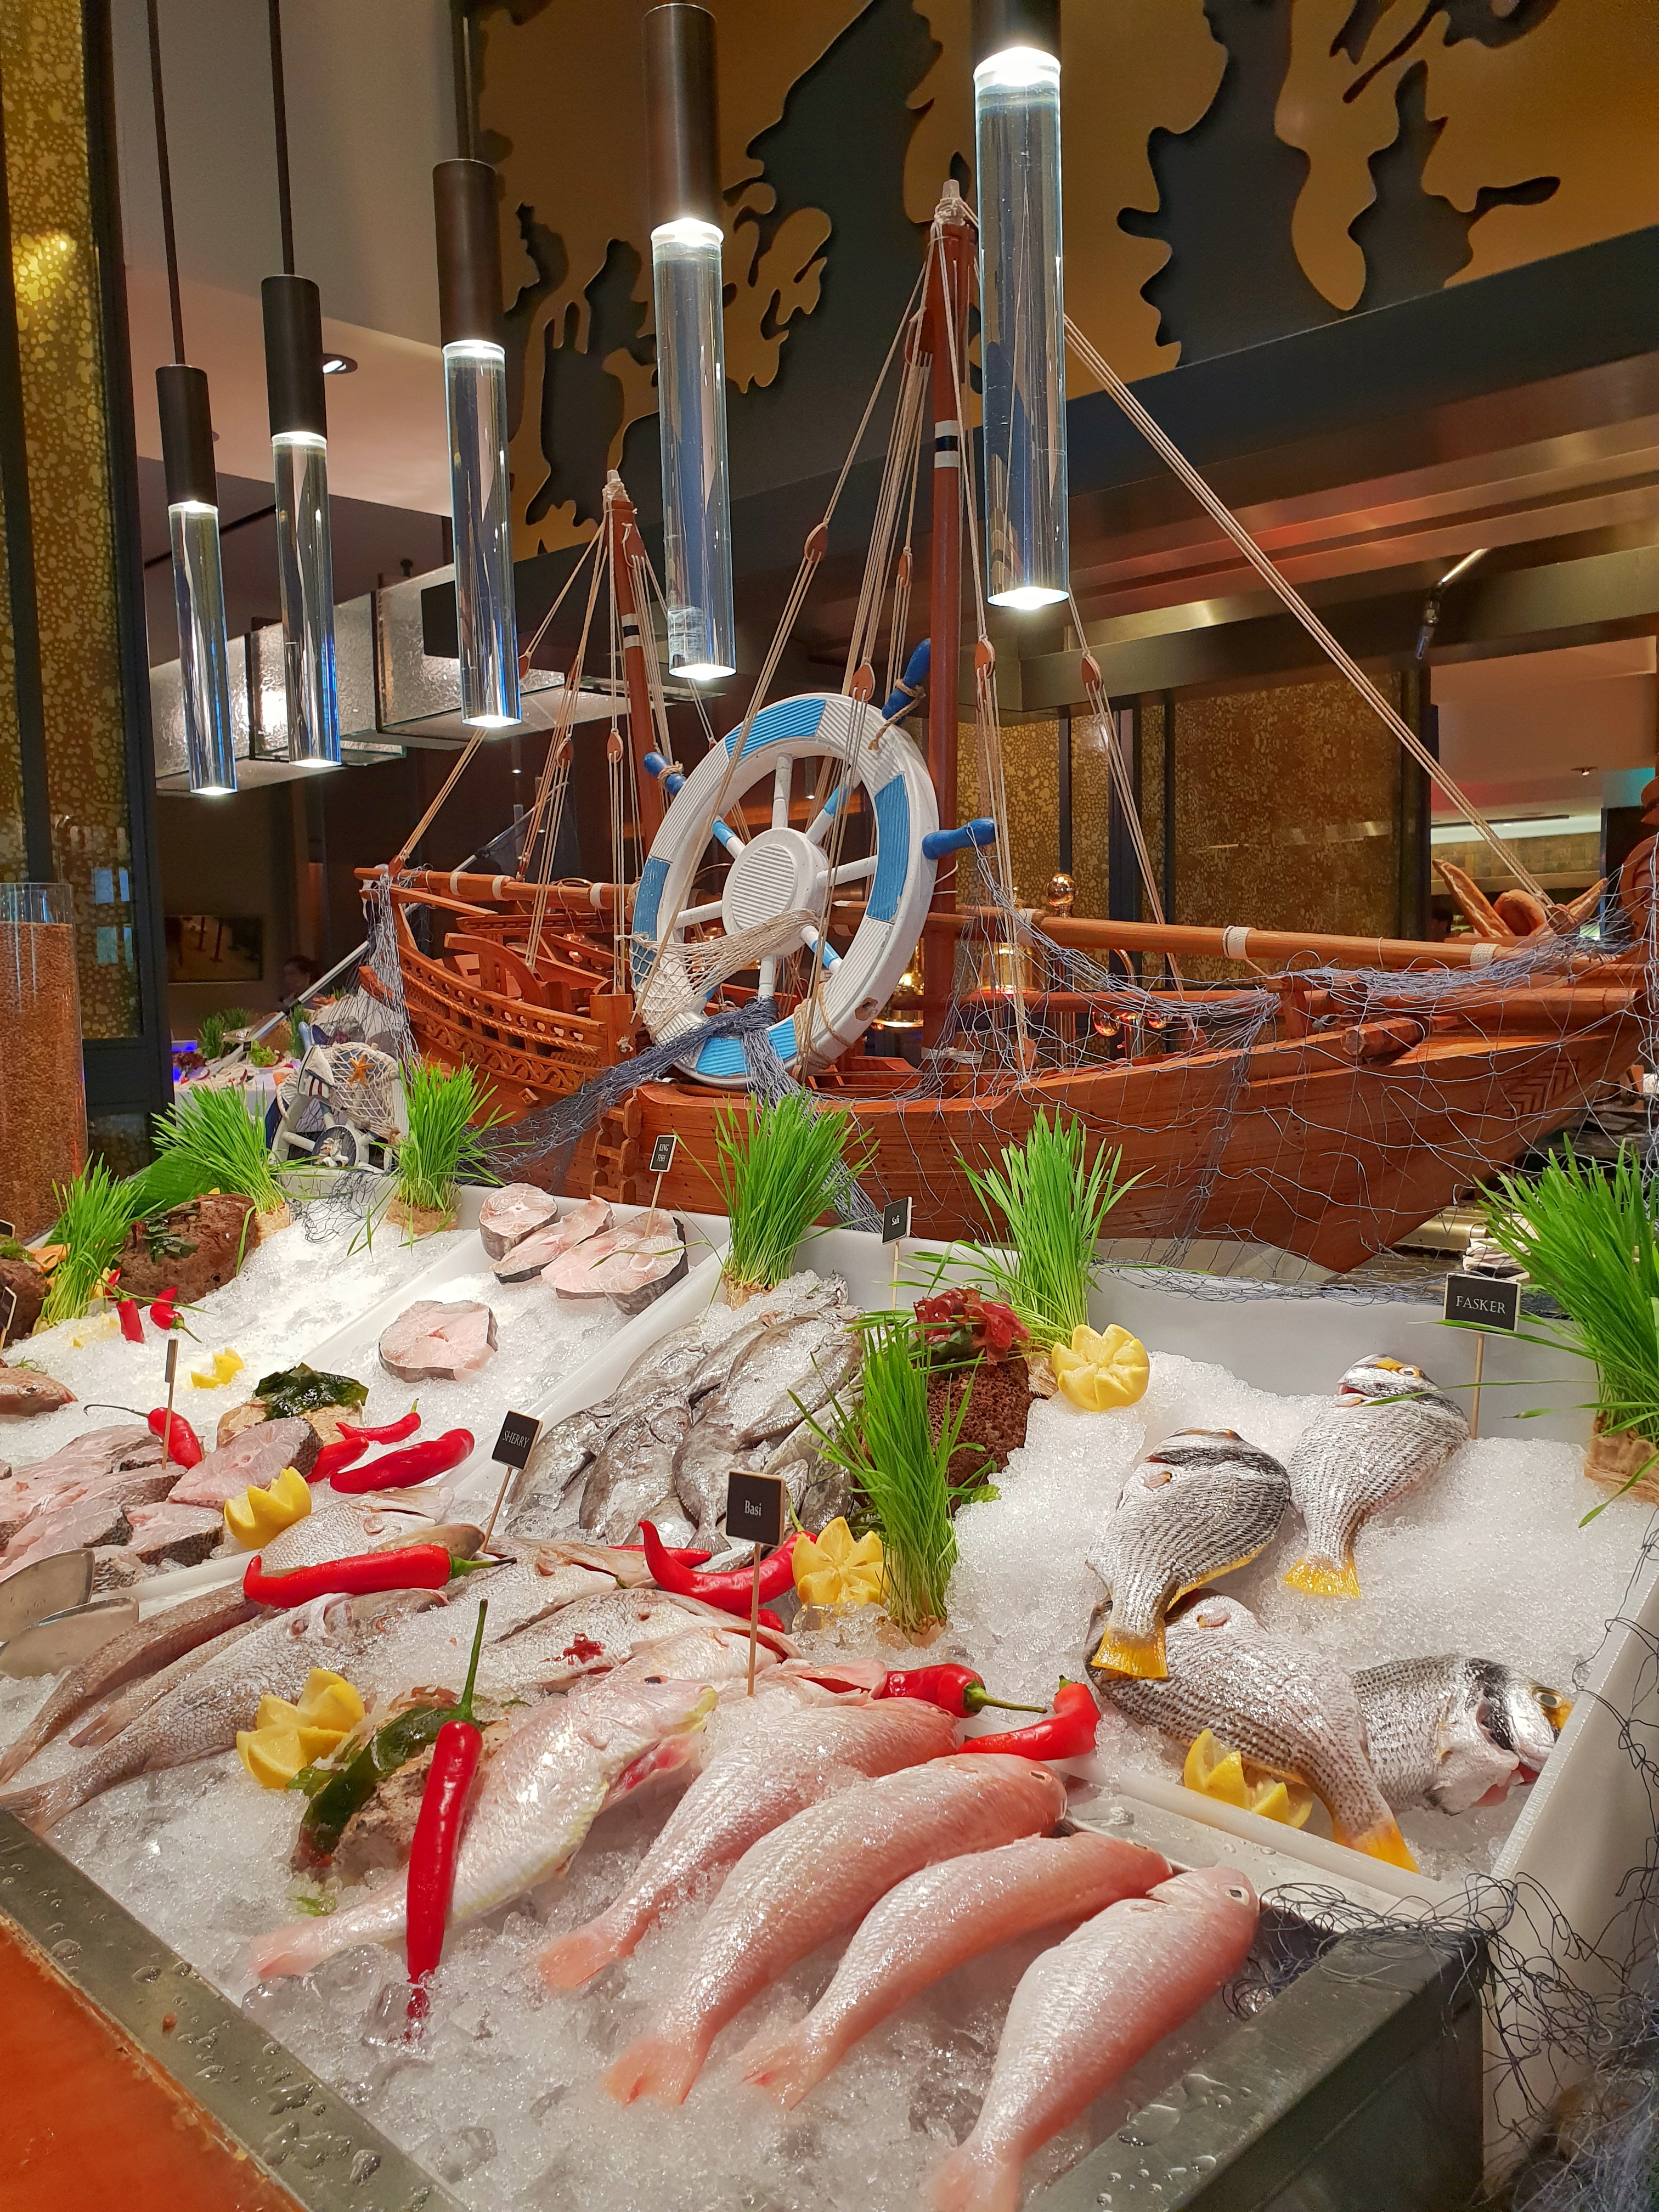 Buffet presentation - Picture of Flavours Restaurant, Doha